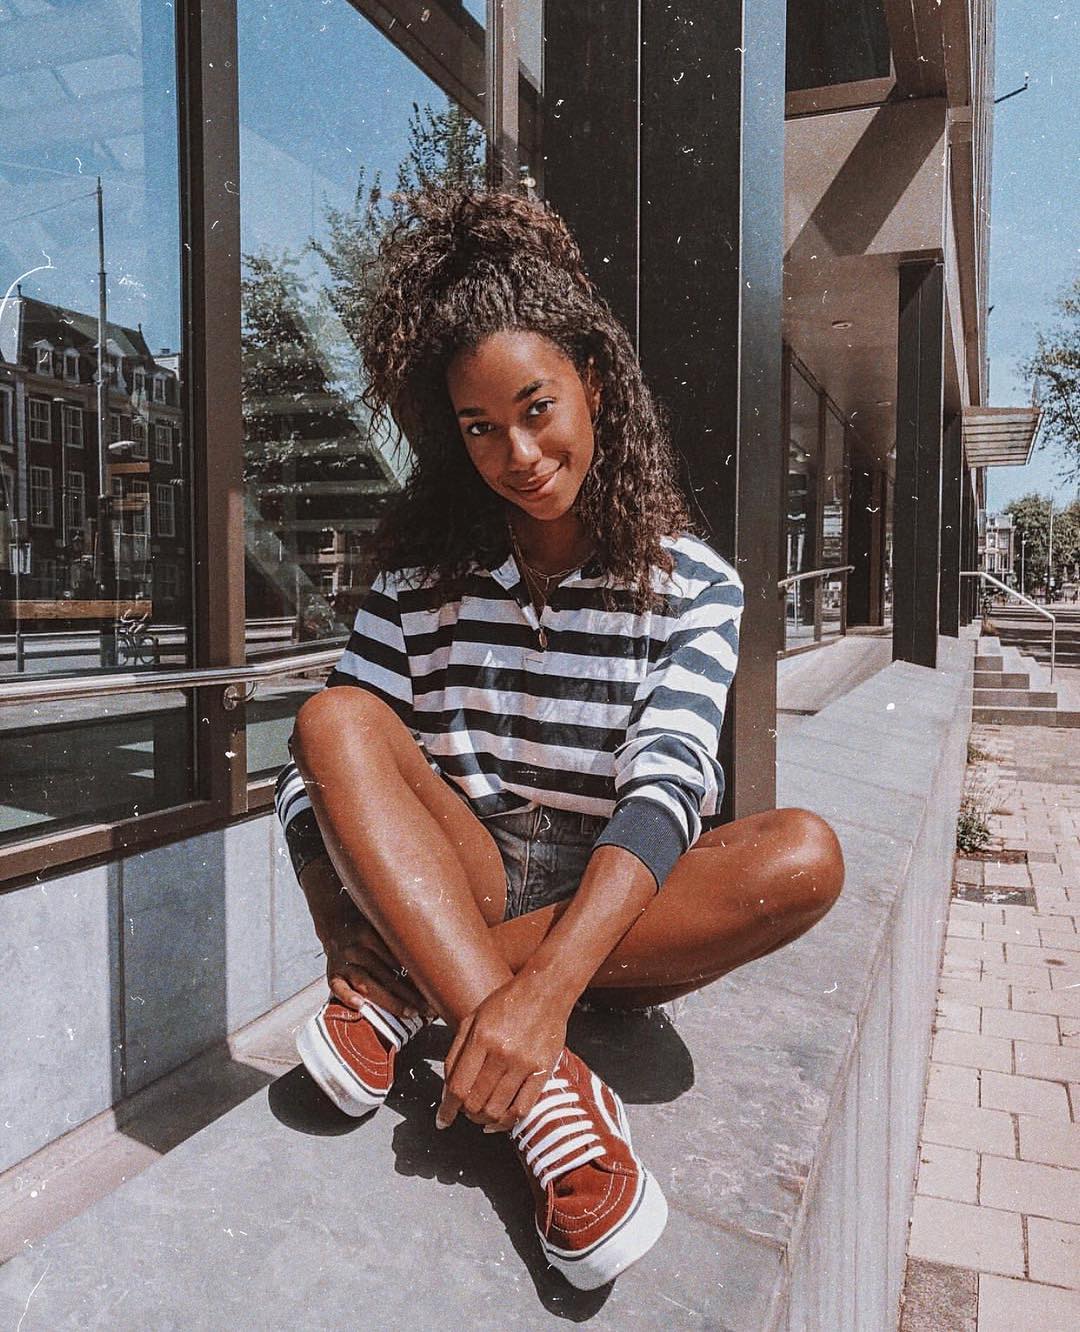 Striped long-sleeved top, denim shorts and trainers for summer 2021